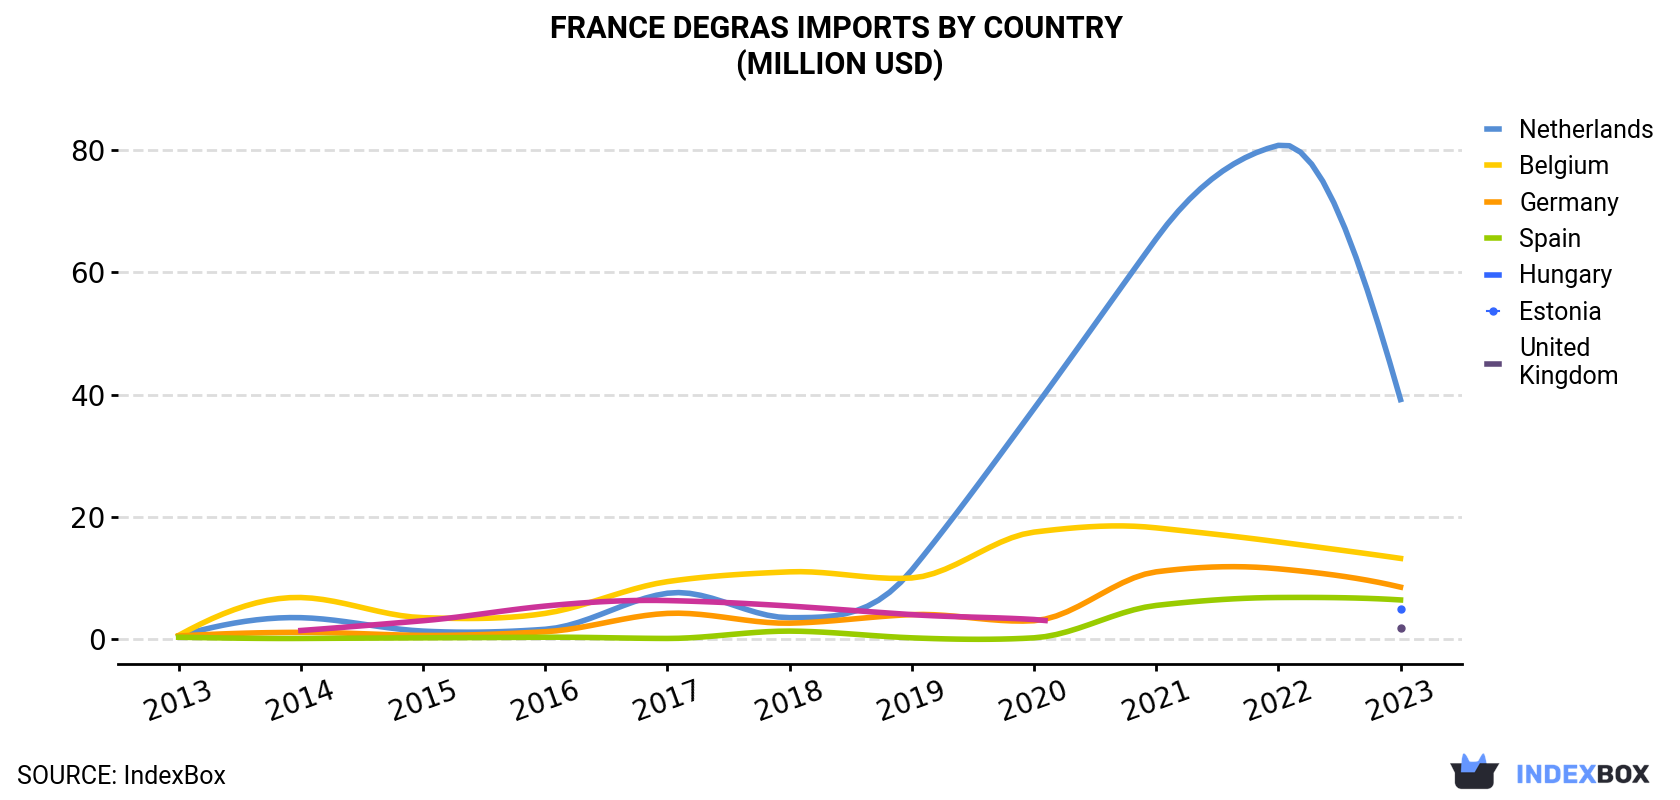 France Degras Imports By Country (Million USD)